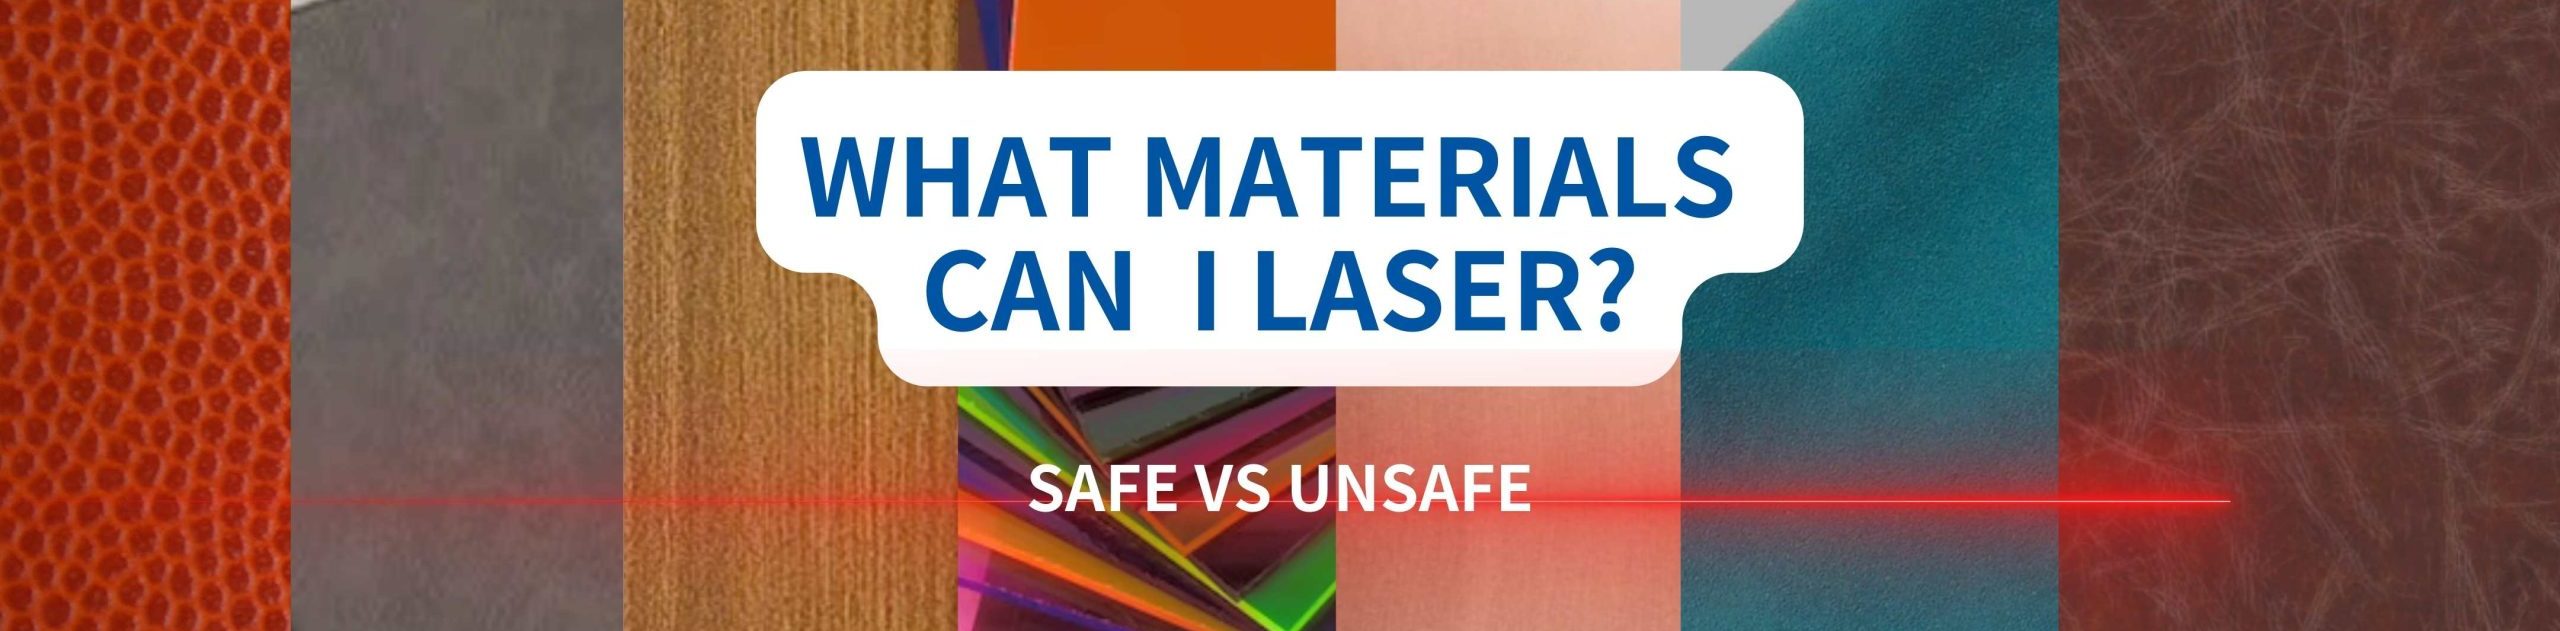 Words say: what materials can i laser? safe vs unsafe materials. image of samples of different materials